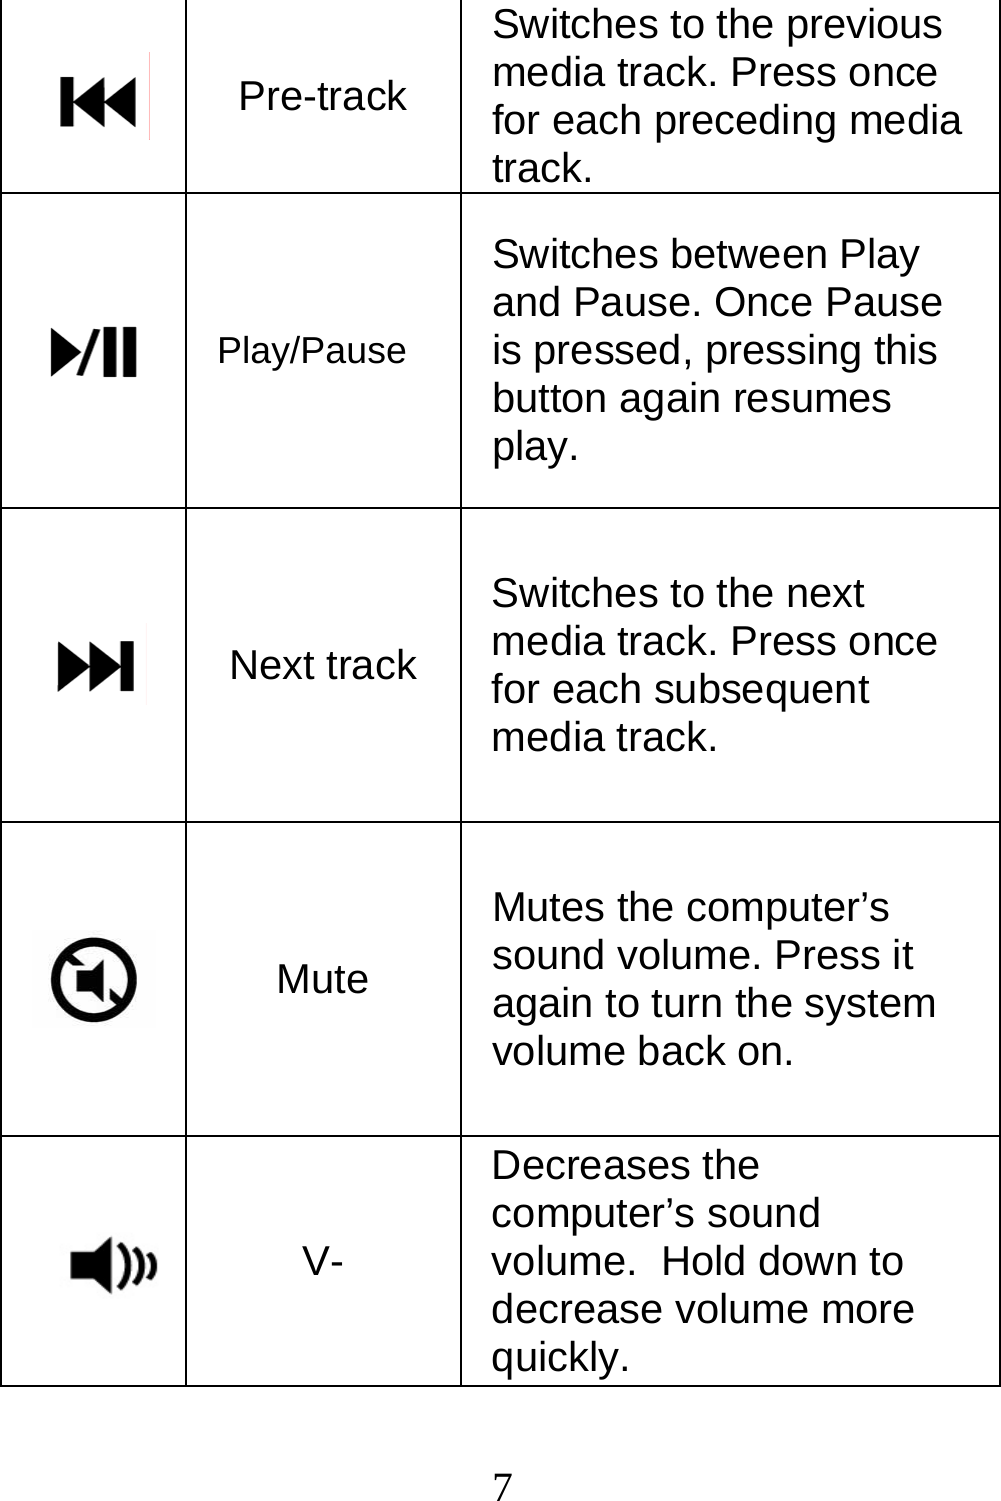  7 Pre-track Switches to the previous media track. Press once for each preceding media track.  Play/Pause Switches between Play and Pause. Once Pause is pressed, pressing this button again resumes play.  Next track Switches to the next media track. Press once for each subsequent media track.  Mute Mutes the computer’s sound volume. Press it again to turn the system volume back on.  V- Decreases the computer’s sound volume.  Hold down to decrease volume more quickly. 